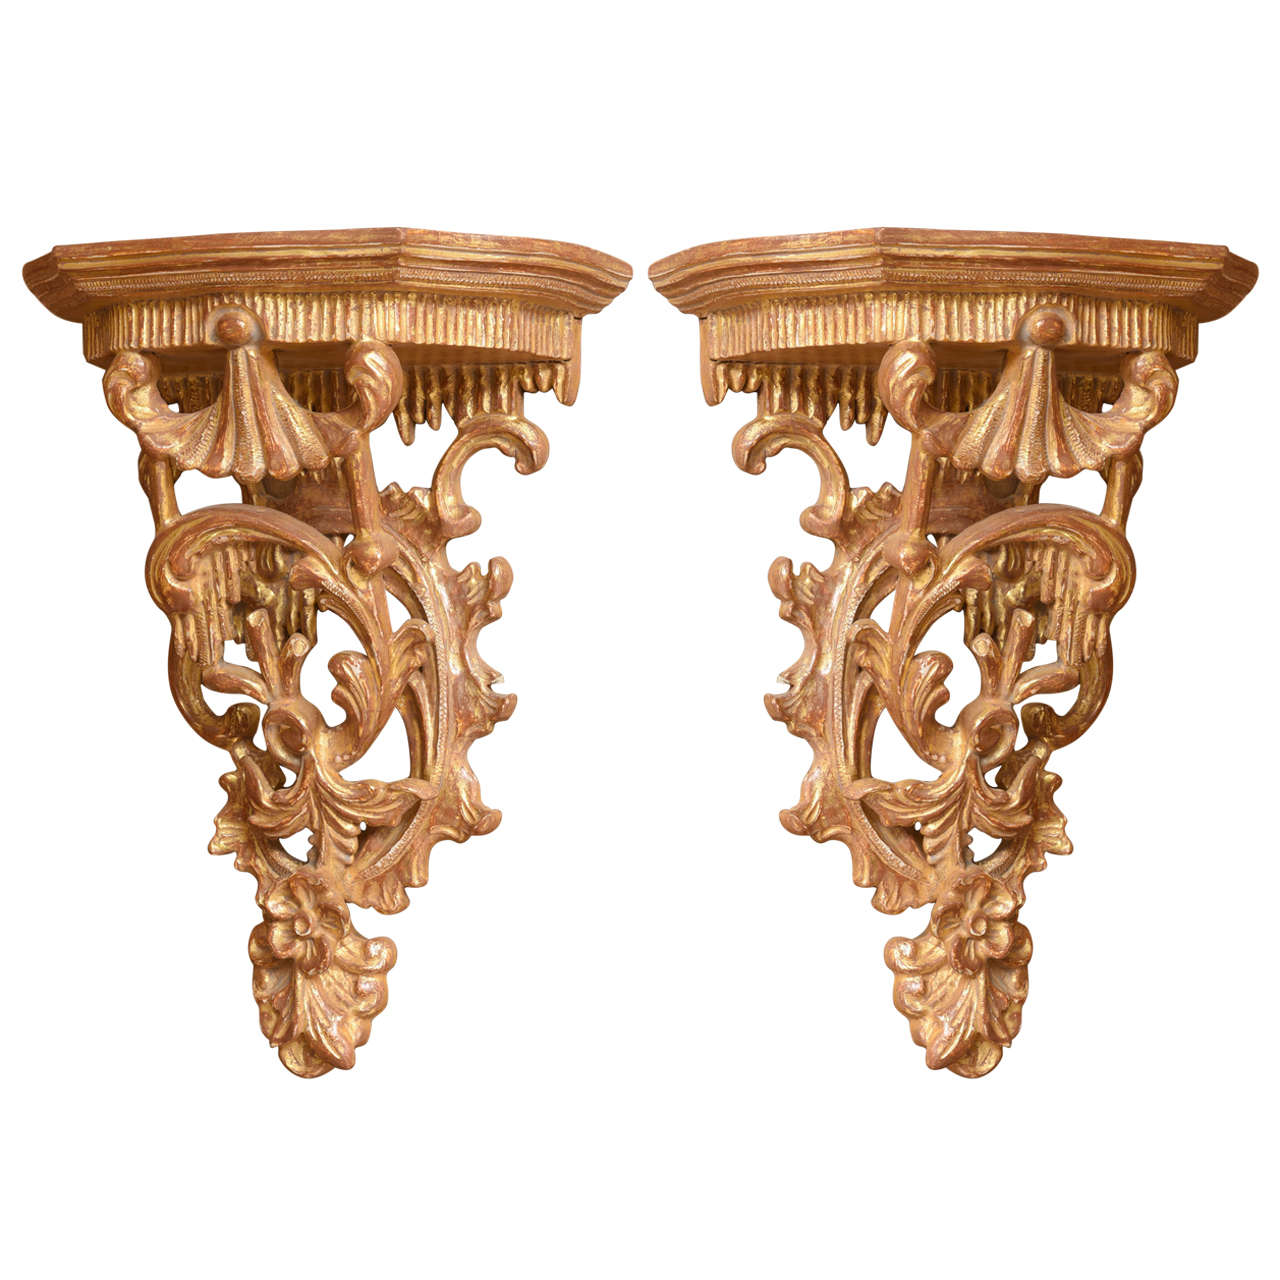 Pair of Chippendale Style Giltwood Wall Brackets